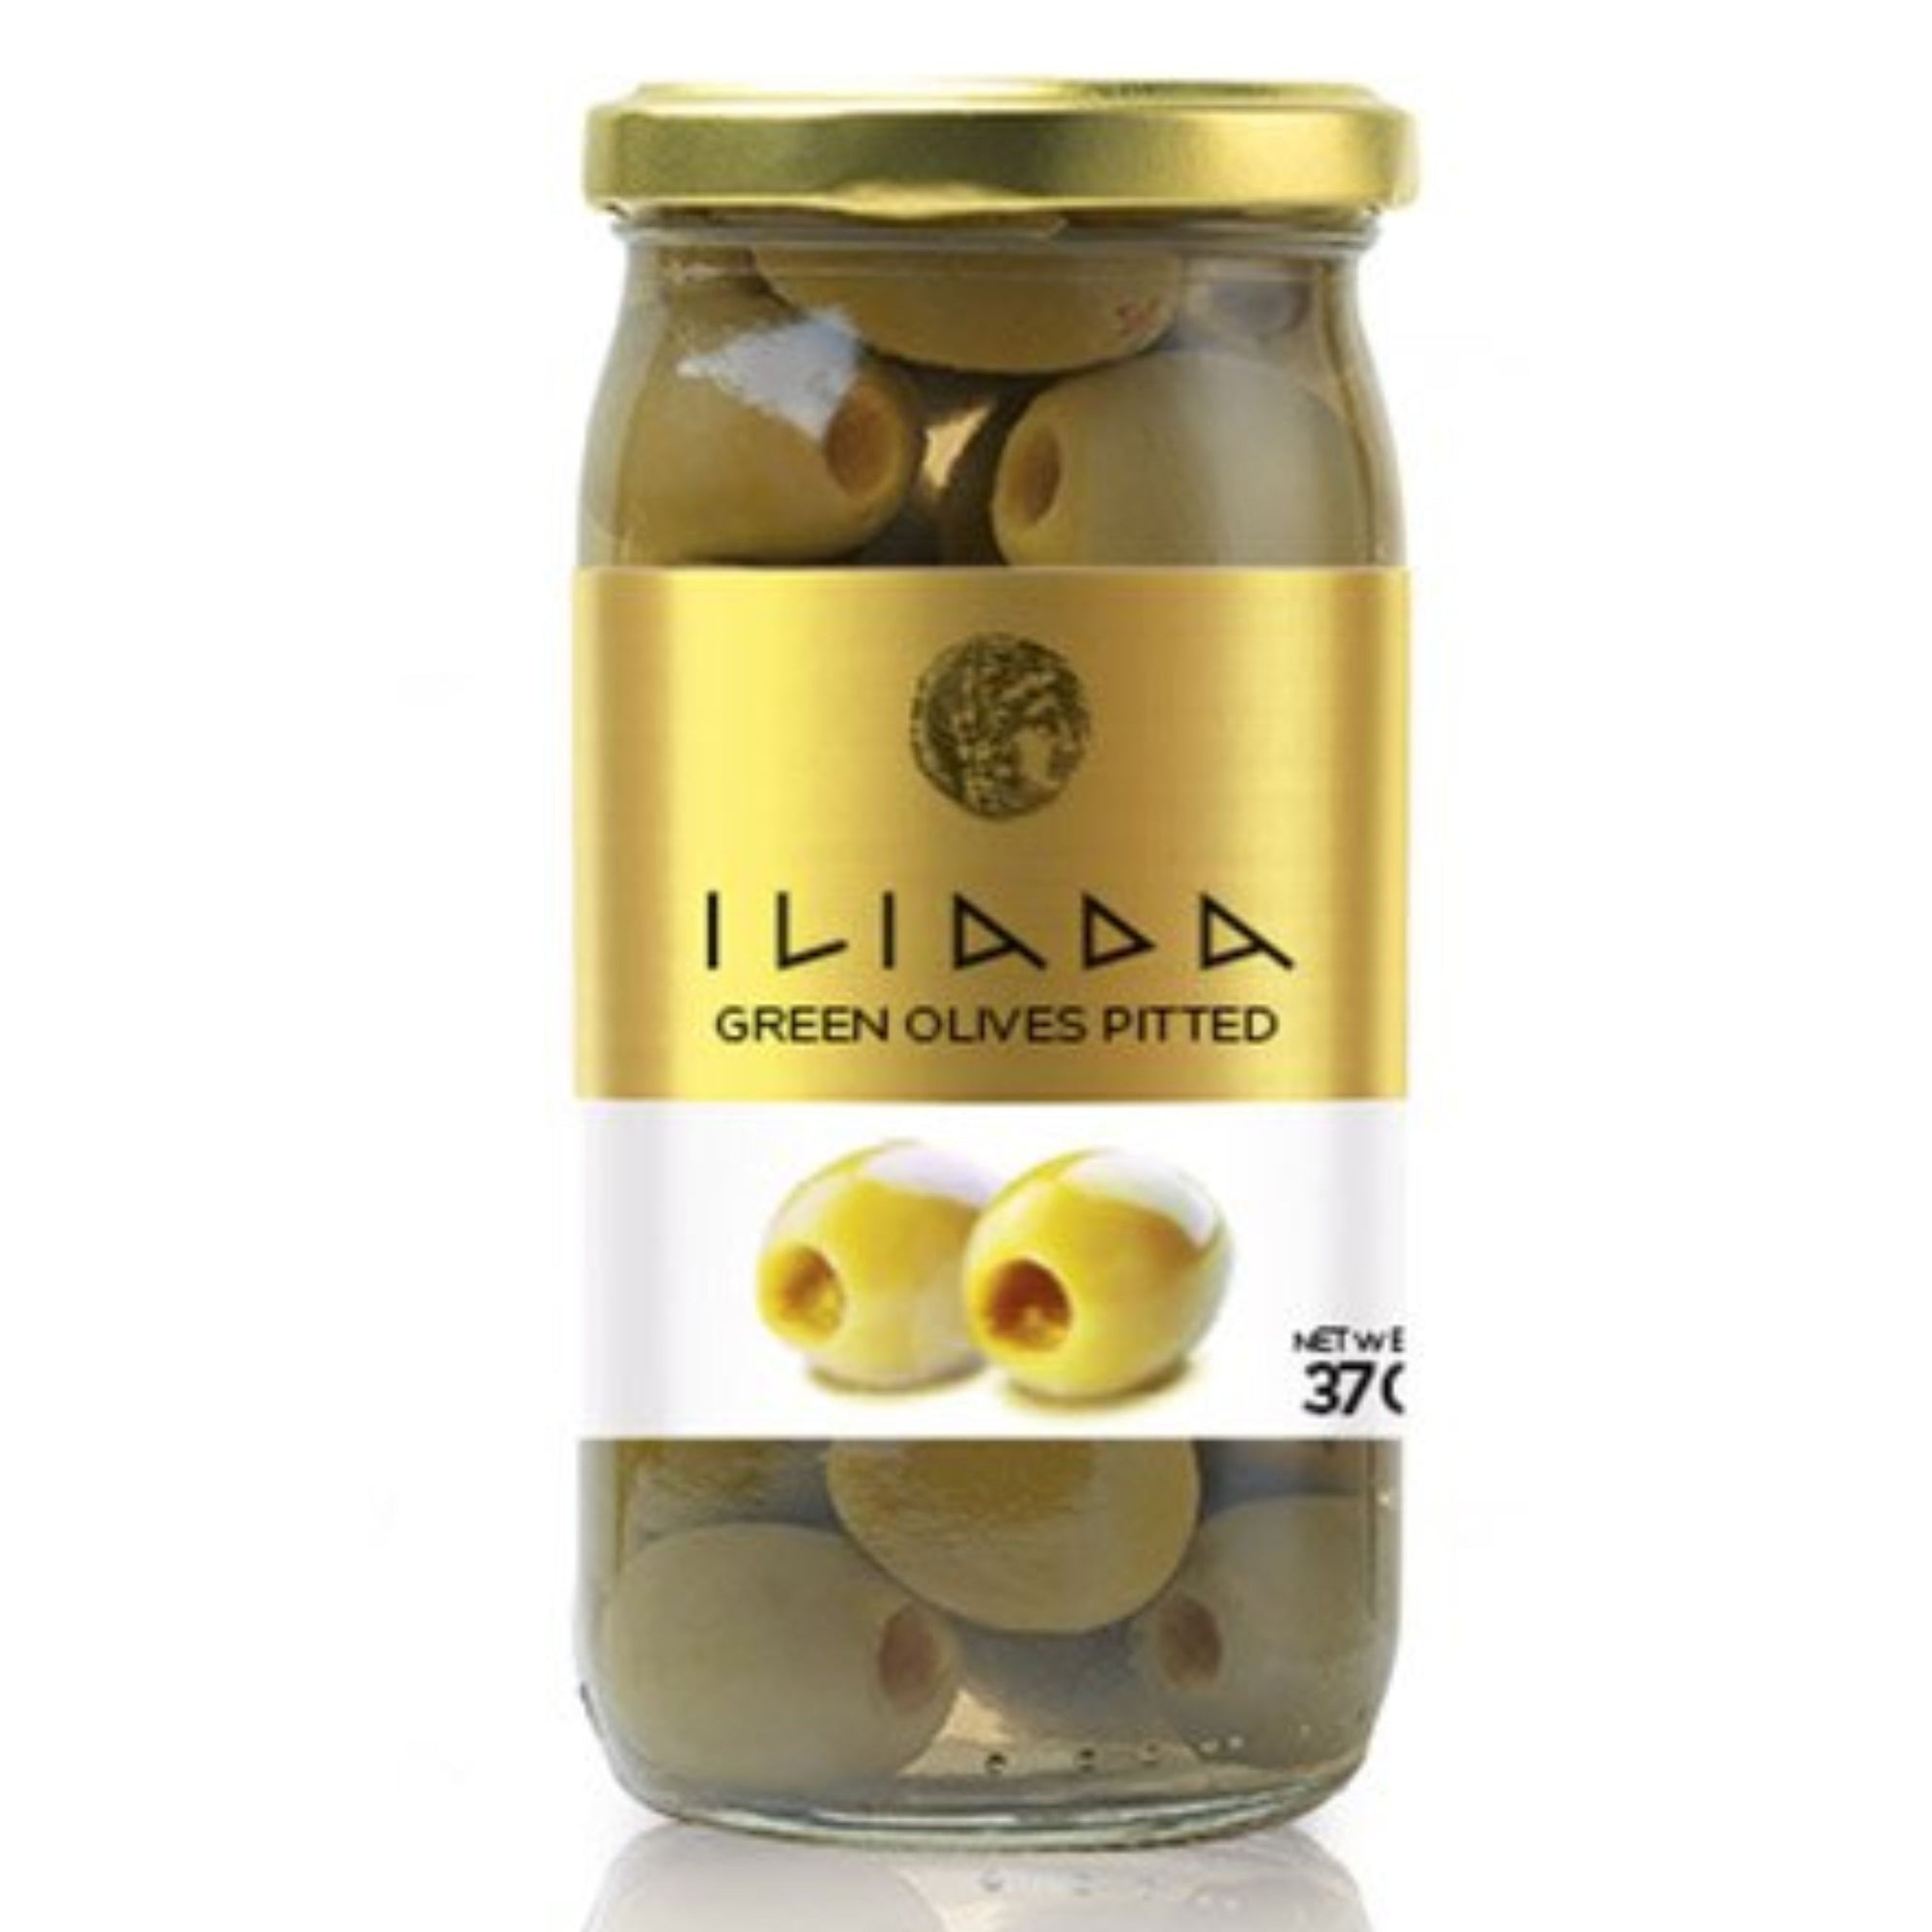 Green Pitted Olives 'Iliada' 370g